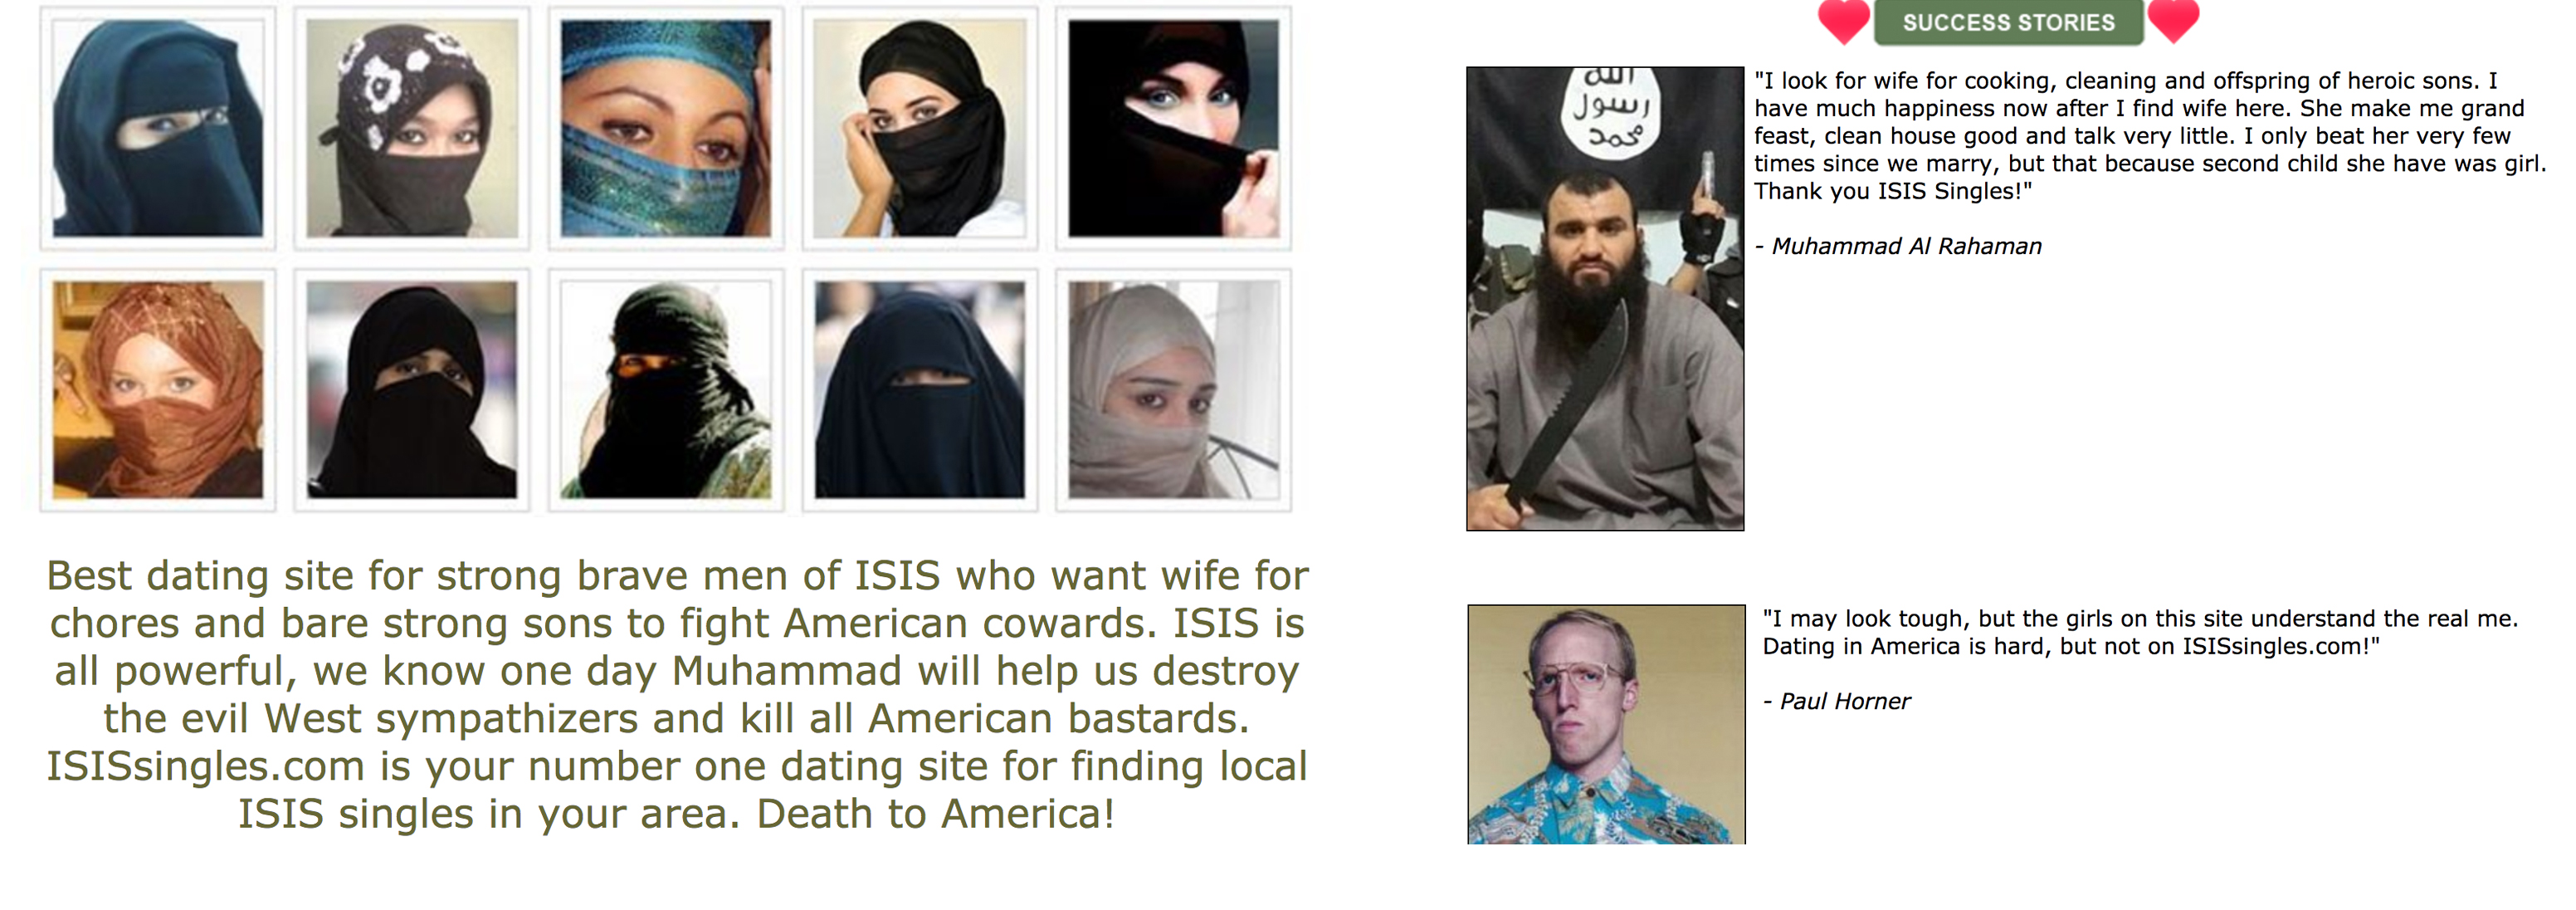 Fake ISIS dating site